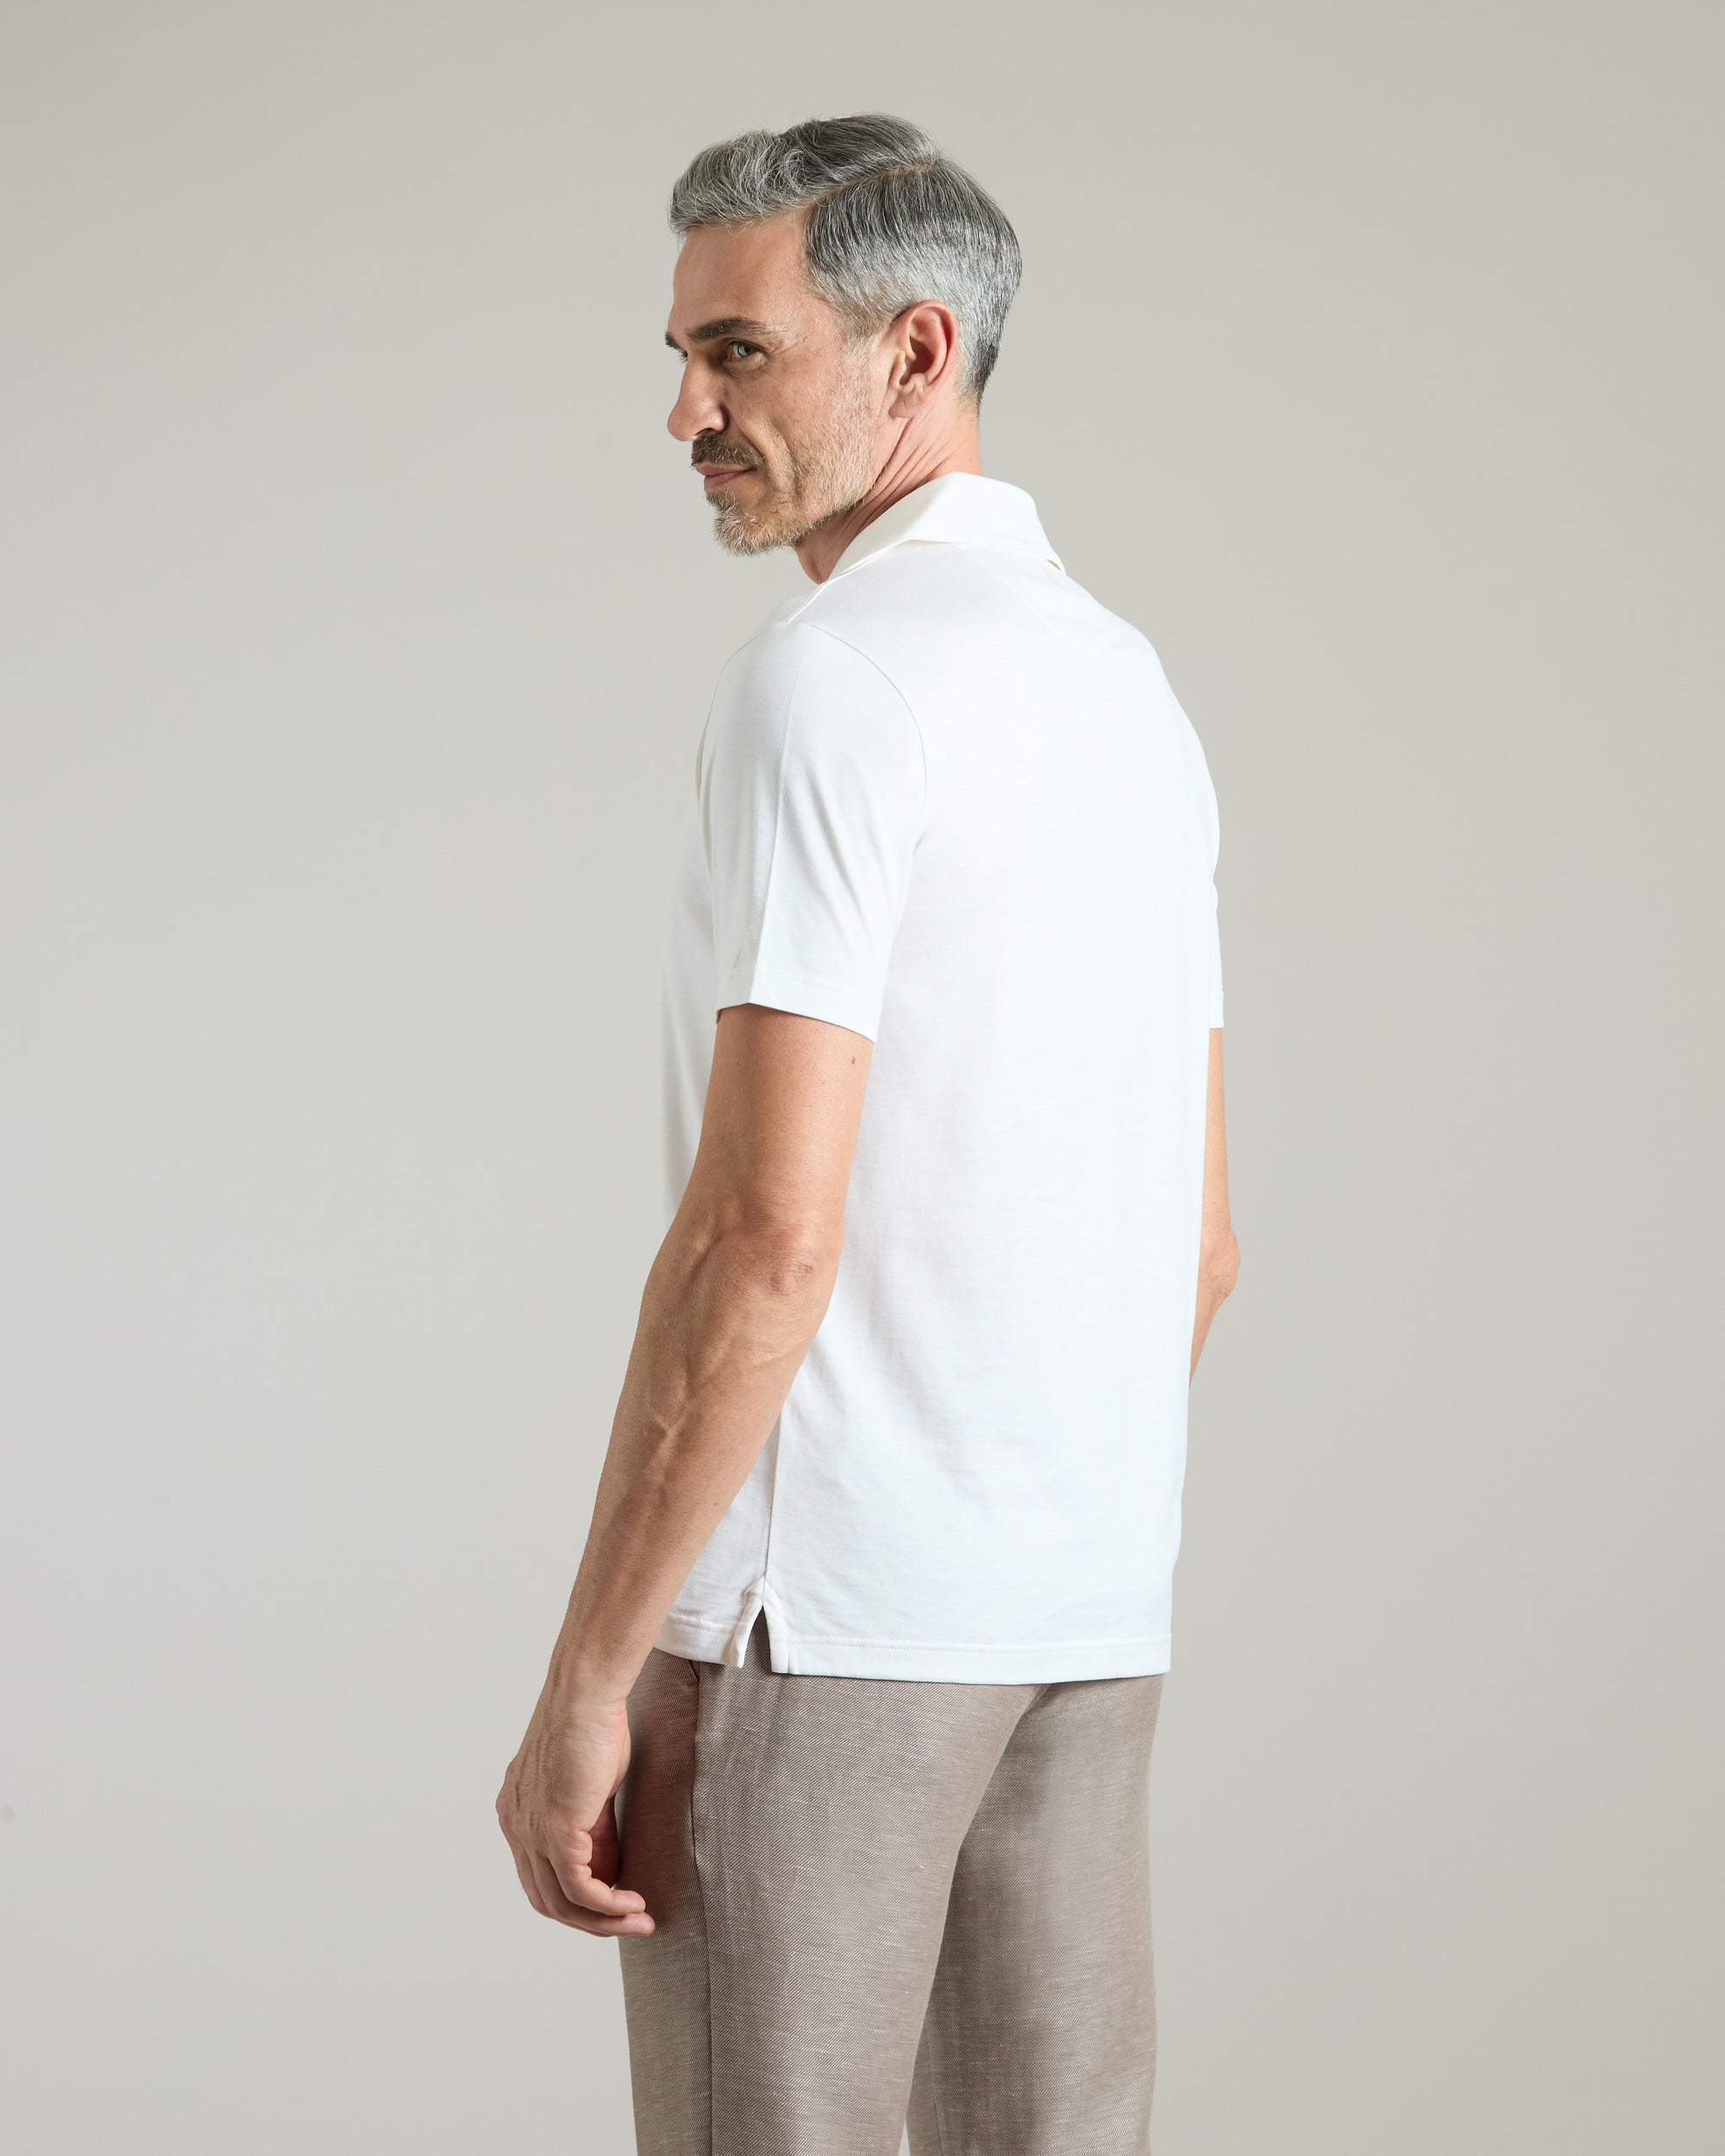 Jersey in Silk and Cotton Polo shirt in white